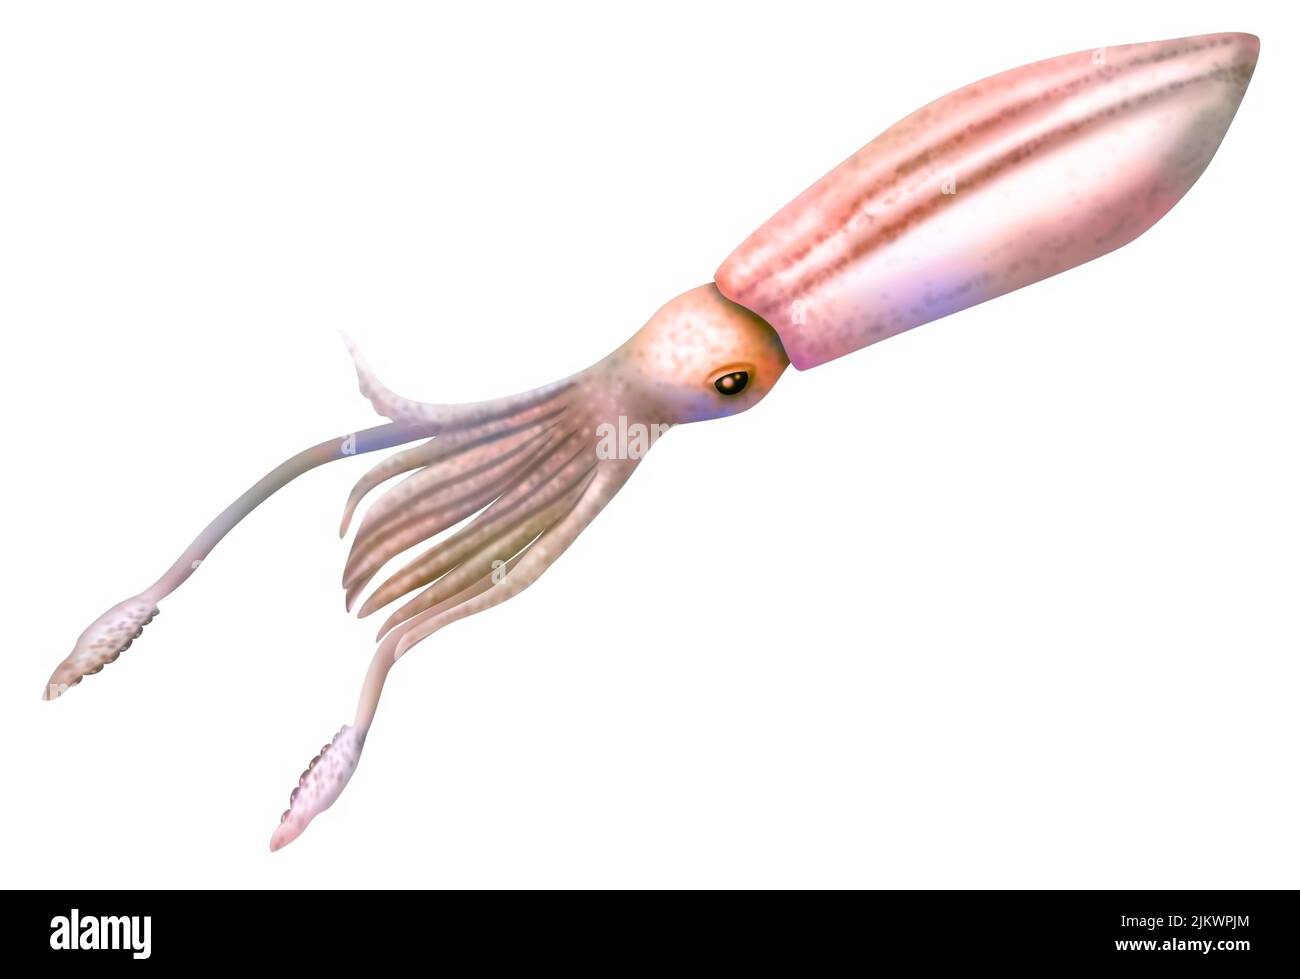 Representation of a giant squid isolated on a white background. Stock Photo